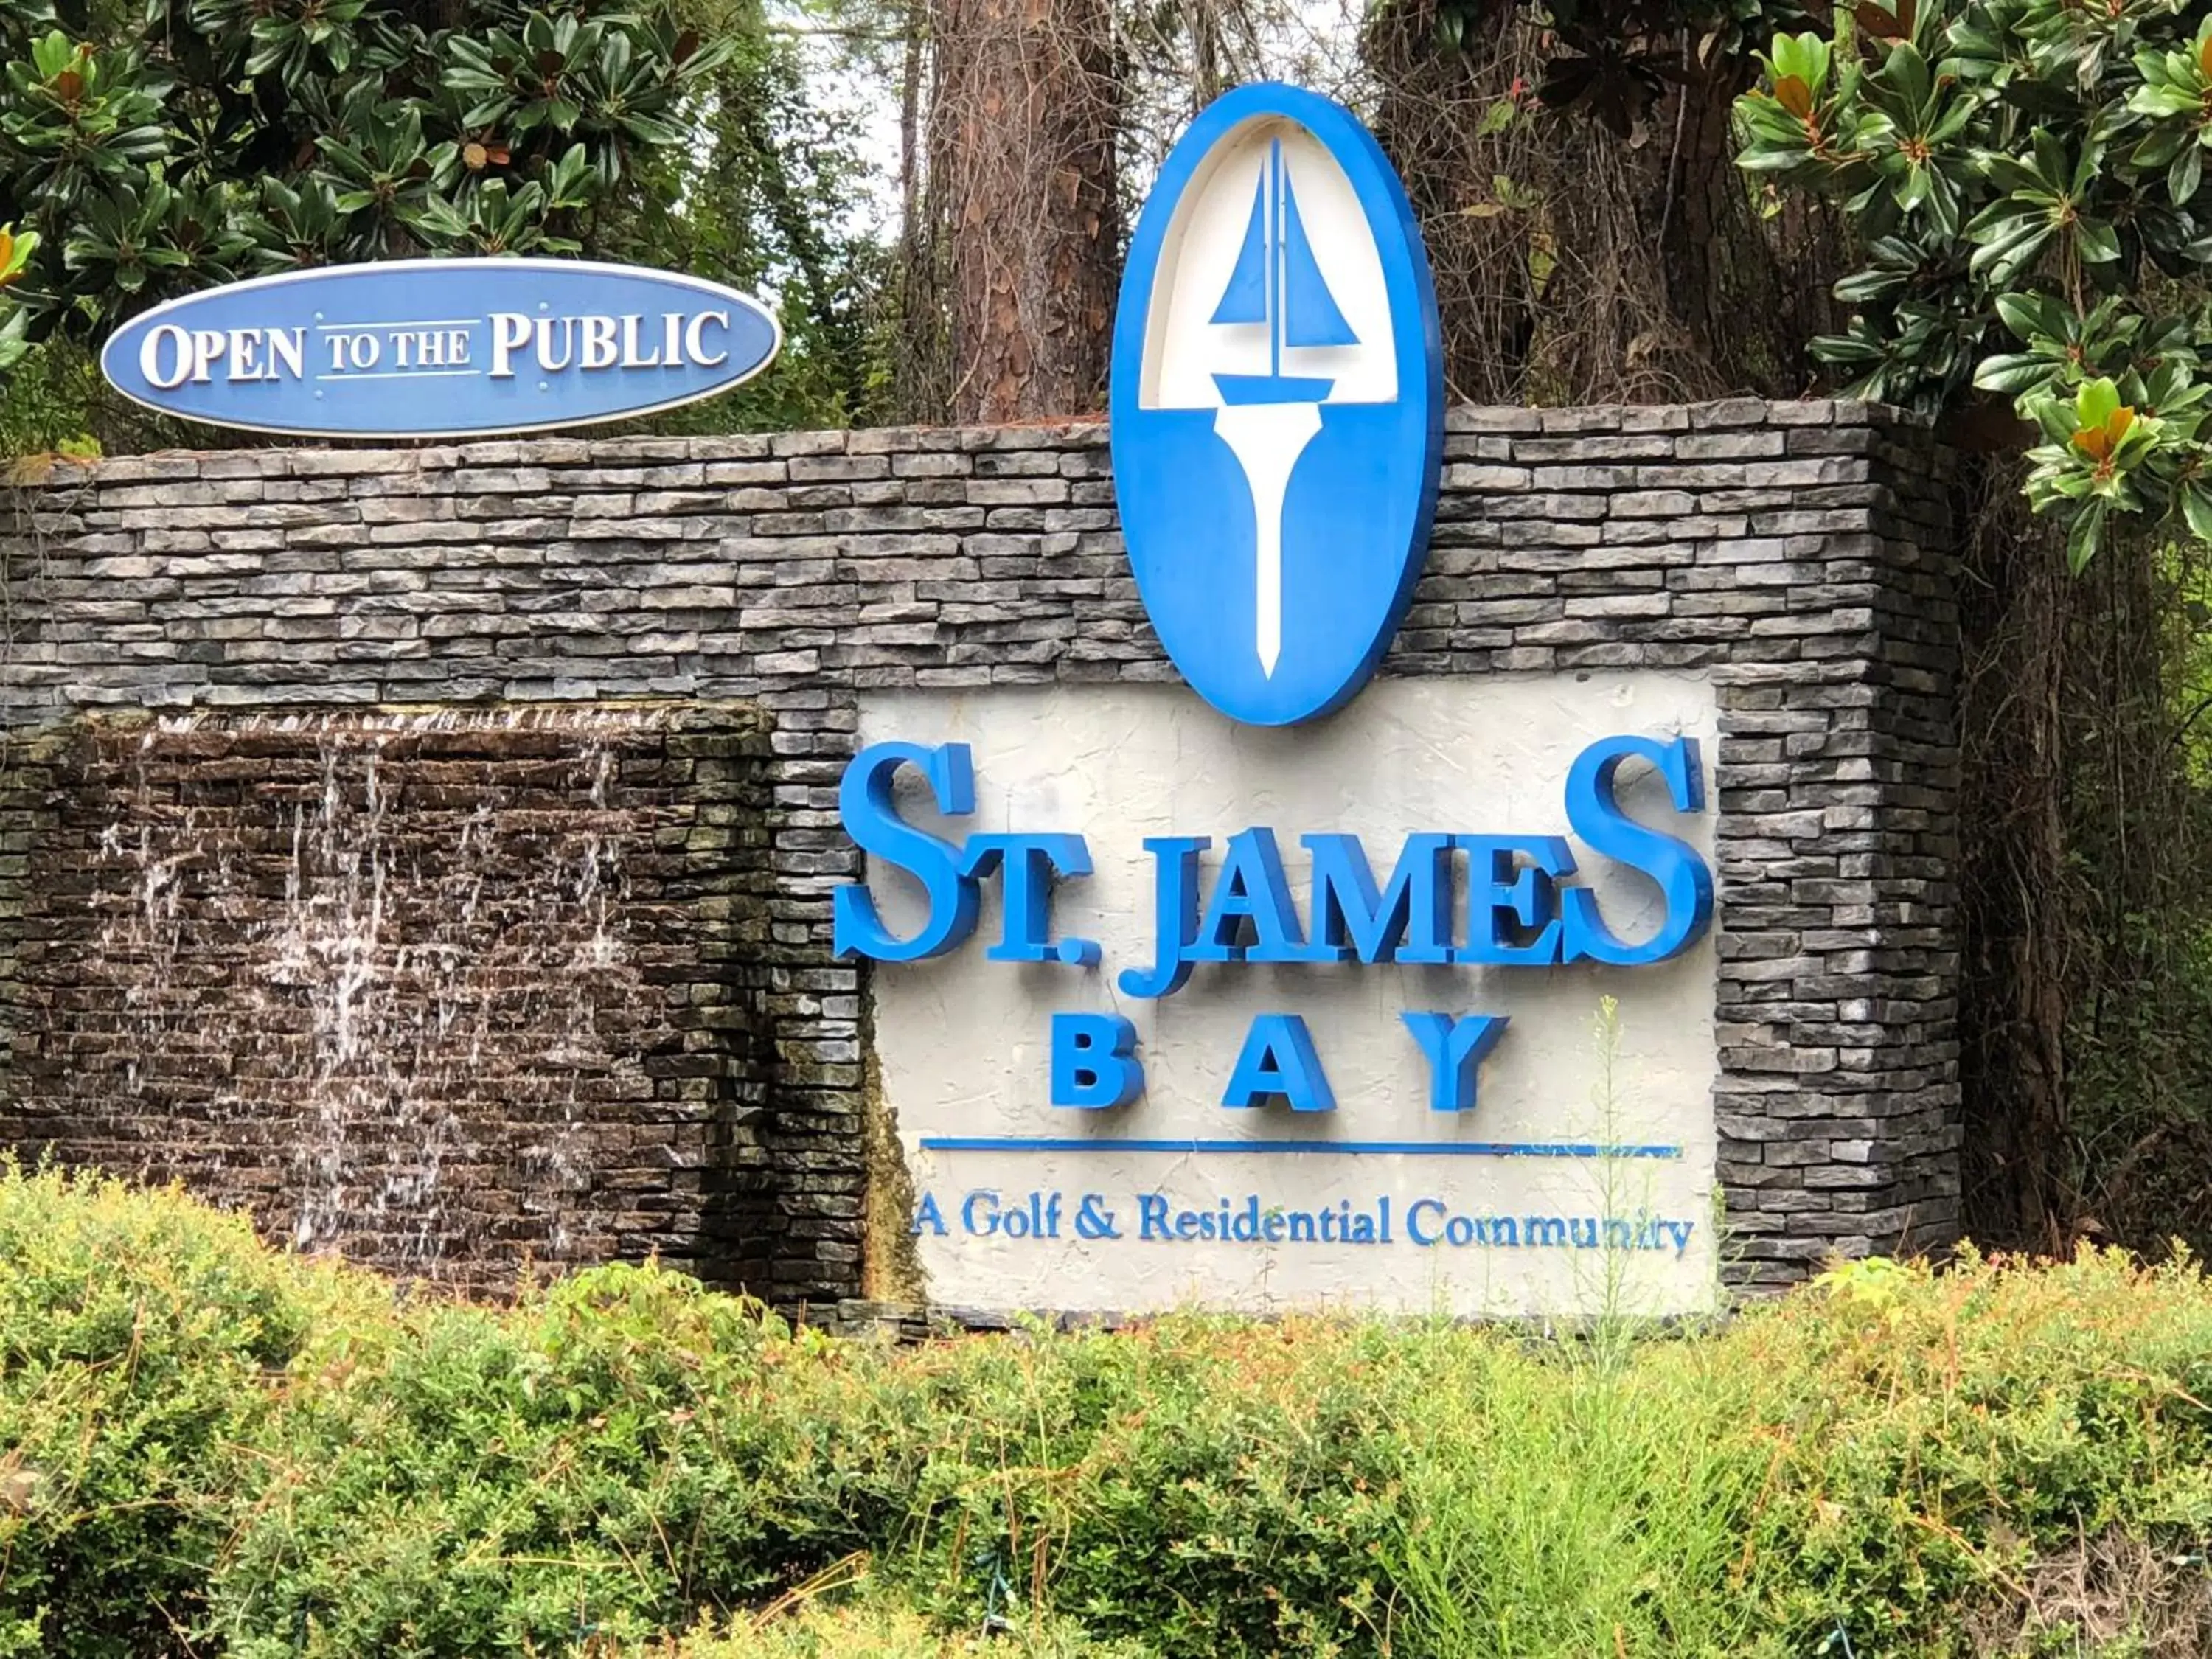 Property Logo/Sign in St. James Bay Golf Club